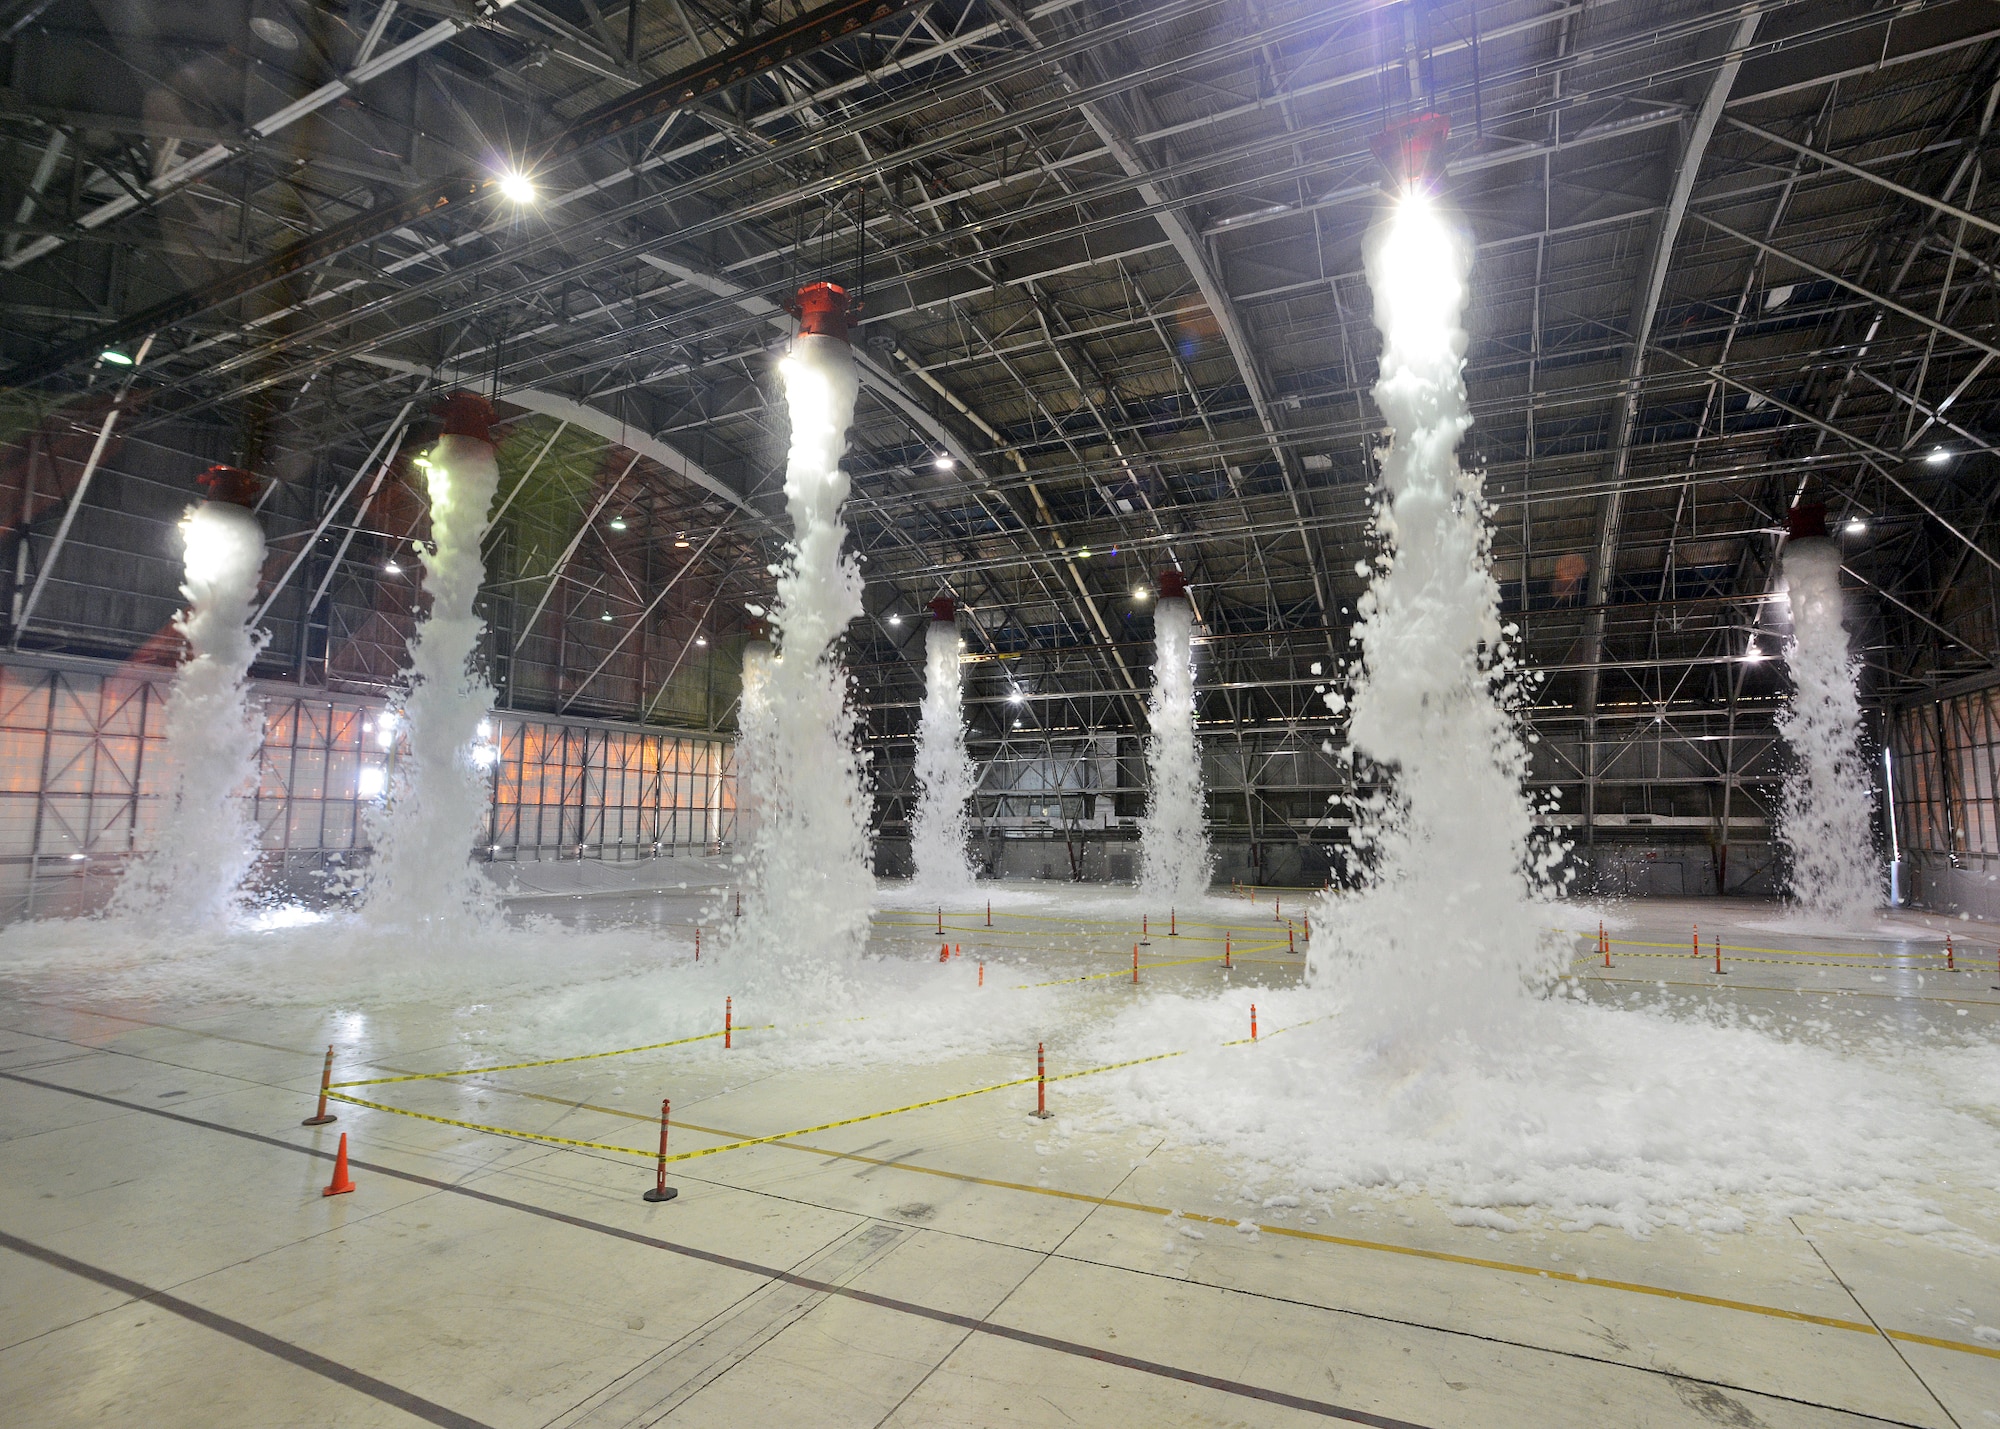 The interior of Hangar 1210 was the site of the base’s most recent emergency scenario exercise that occurred Nov. 26. The hangar, which has 10 large capacity and 2 small capacity foam generators, released approximately 110 gallons of two percent Ansul Jet-Ex foam concentrate that is part of the newly-installed fire suppression system. The foam is detergent-based with additives to keep it stable and keep it from freezing. The purpose of the exercise was so Exercise Evaluation Team members could assess how on-base emergency response personnel gain and maintain control of a site after a fire suppression system discharge incident has occurred. (U.S. Air Force photo by Jet Fabara)